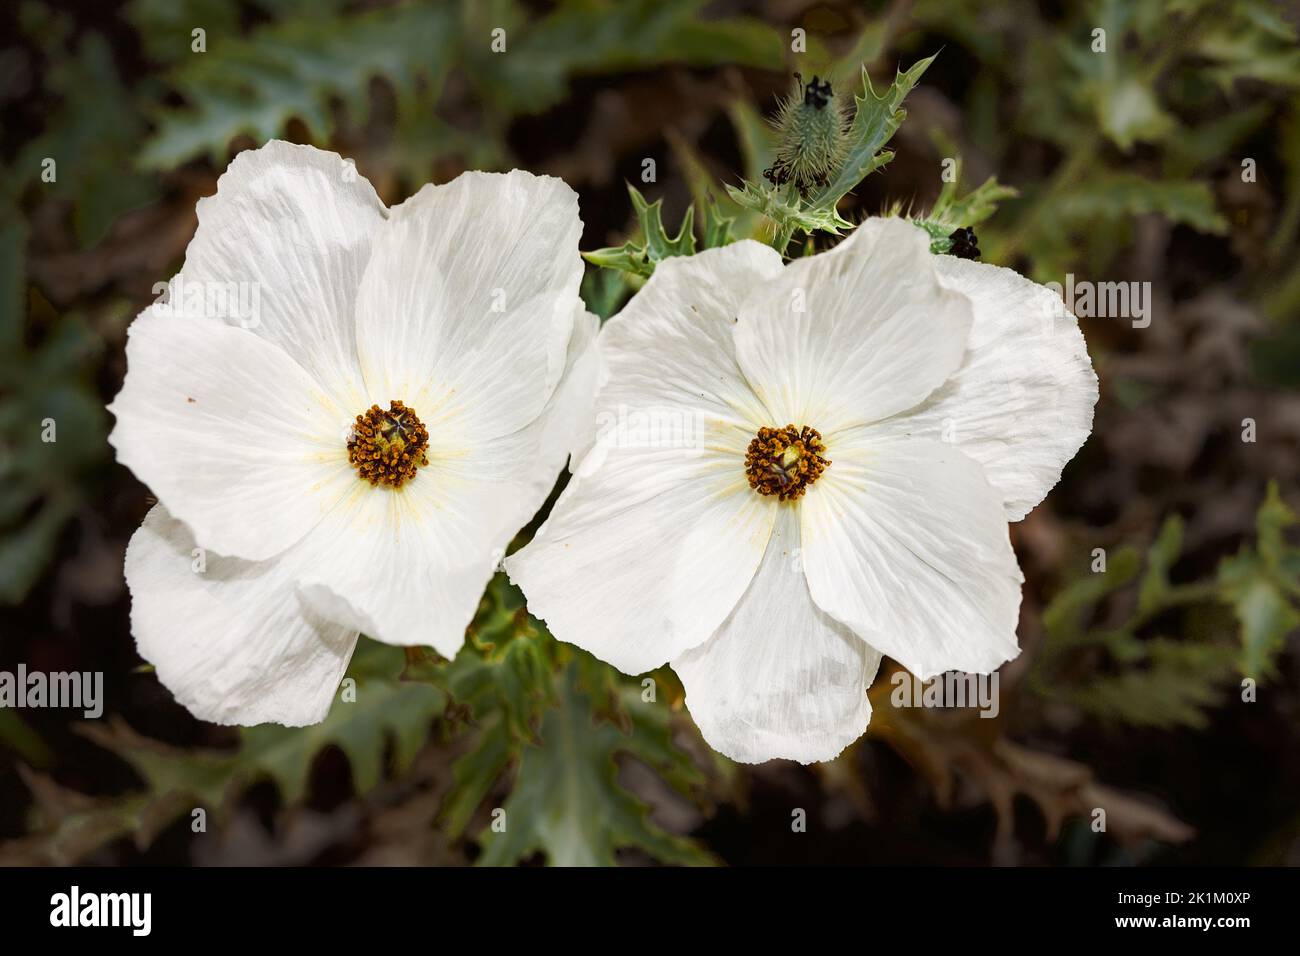 The White textured petals of the argemone platyceras or crested poppy flower, a member of the papaveraceae family, found mainly in Mexico. Stock Photo